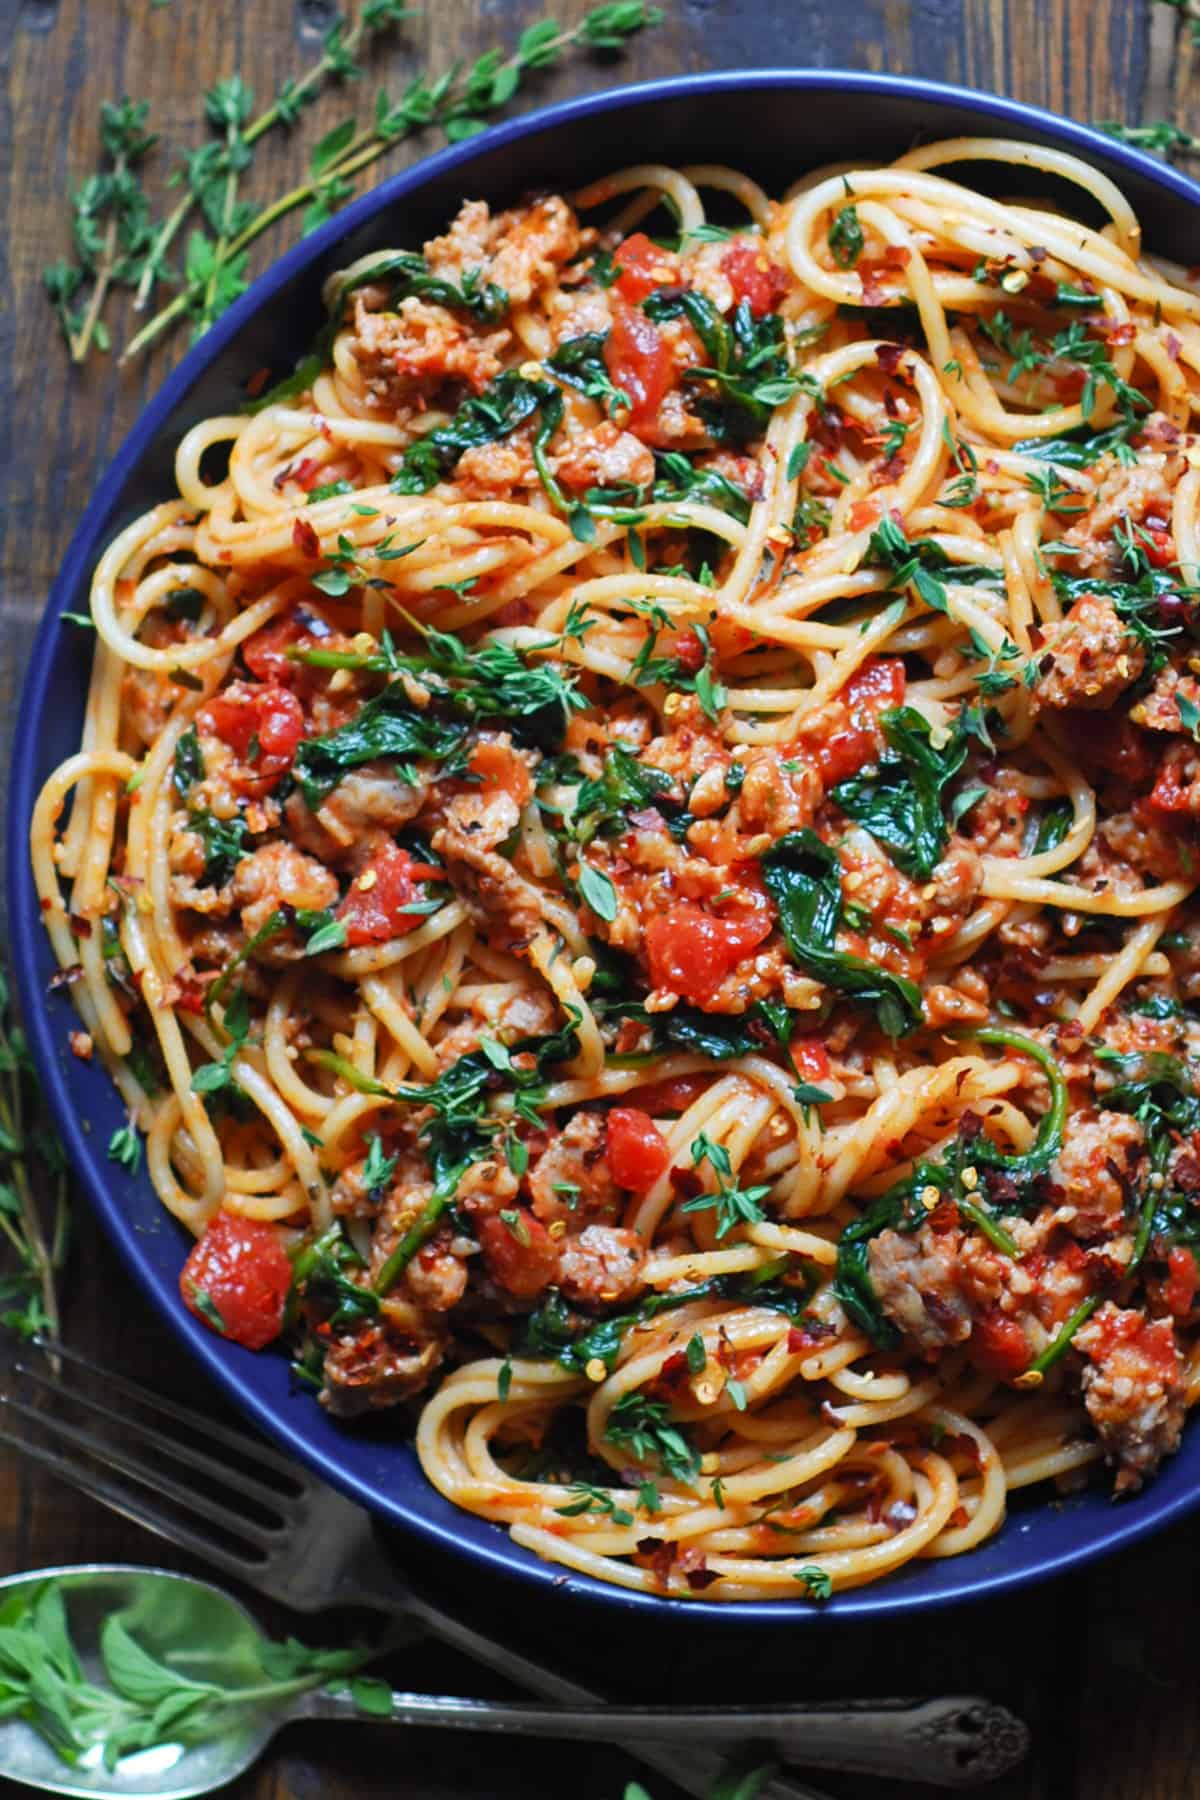 Italian Sausage Spaghetti with Spinach and Tomatoes in a blue bowl.